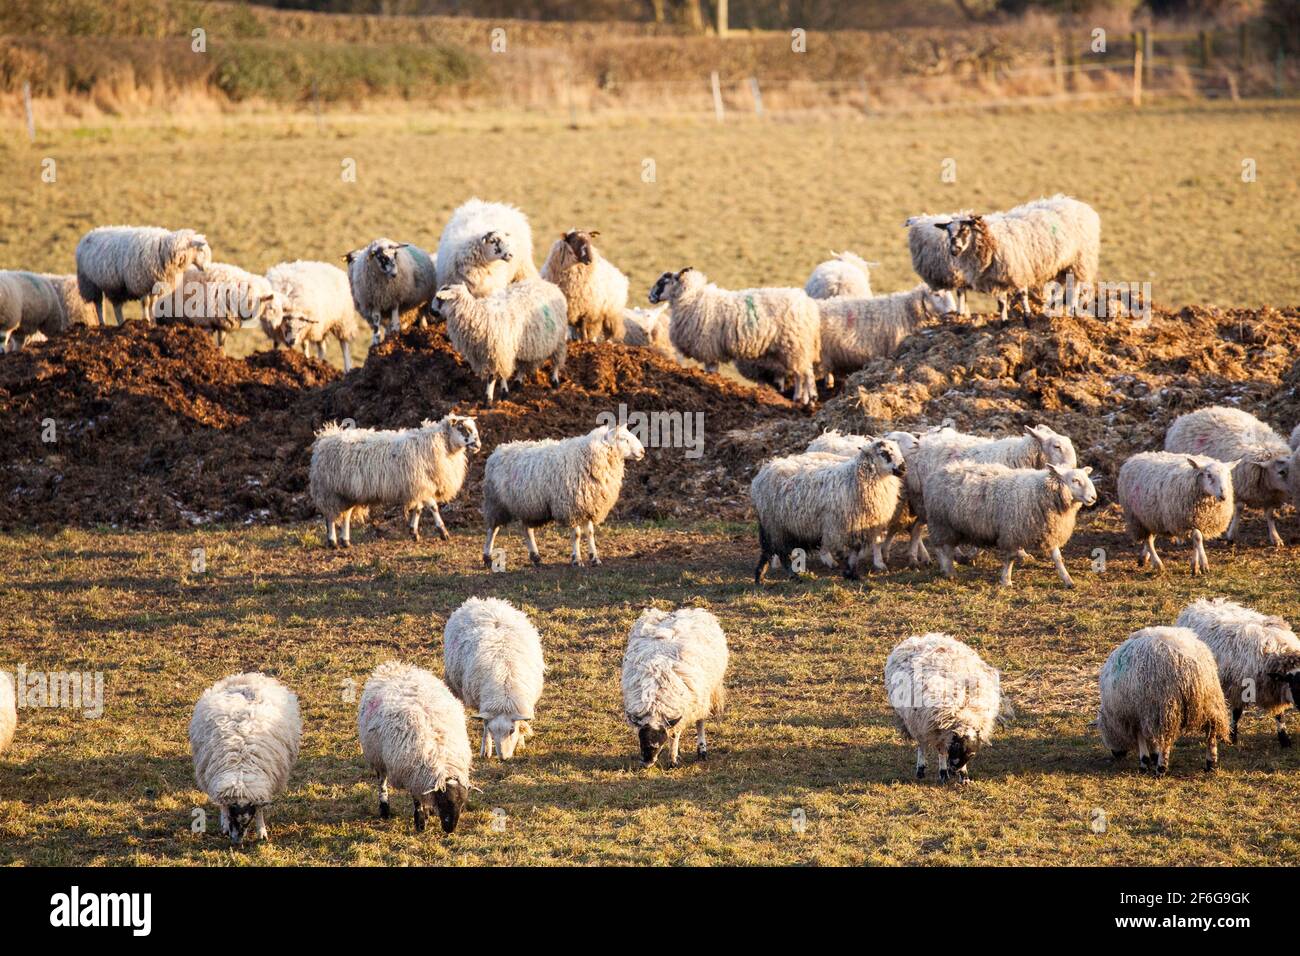 Flock of sheep in the English countryside playing and climbing on a heap of manure during winter Stock Photo